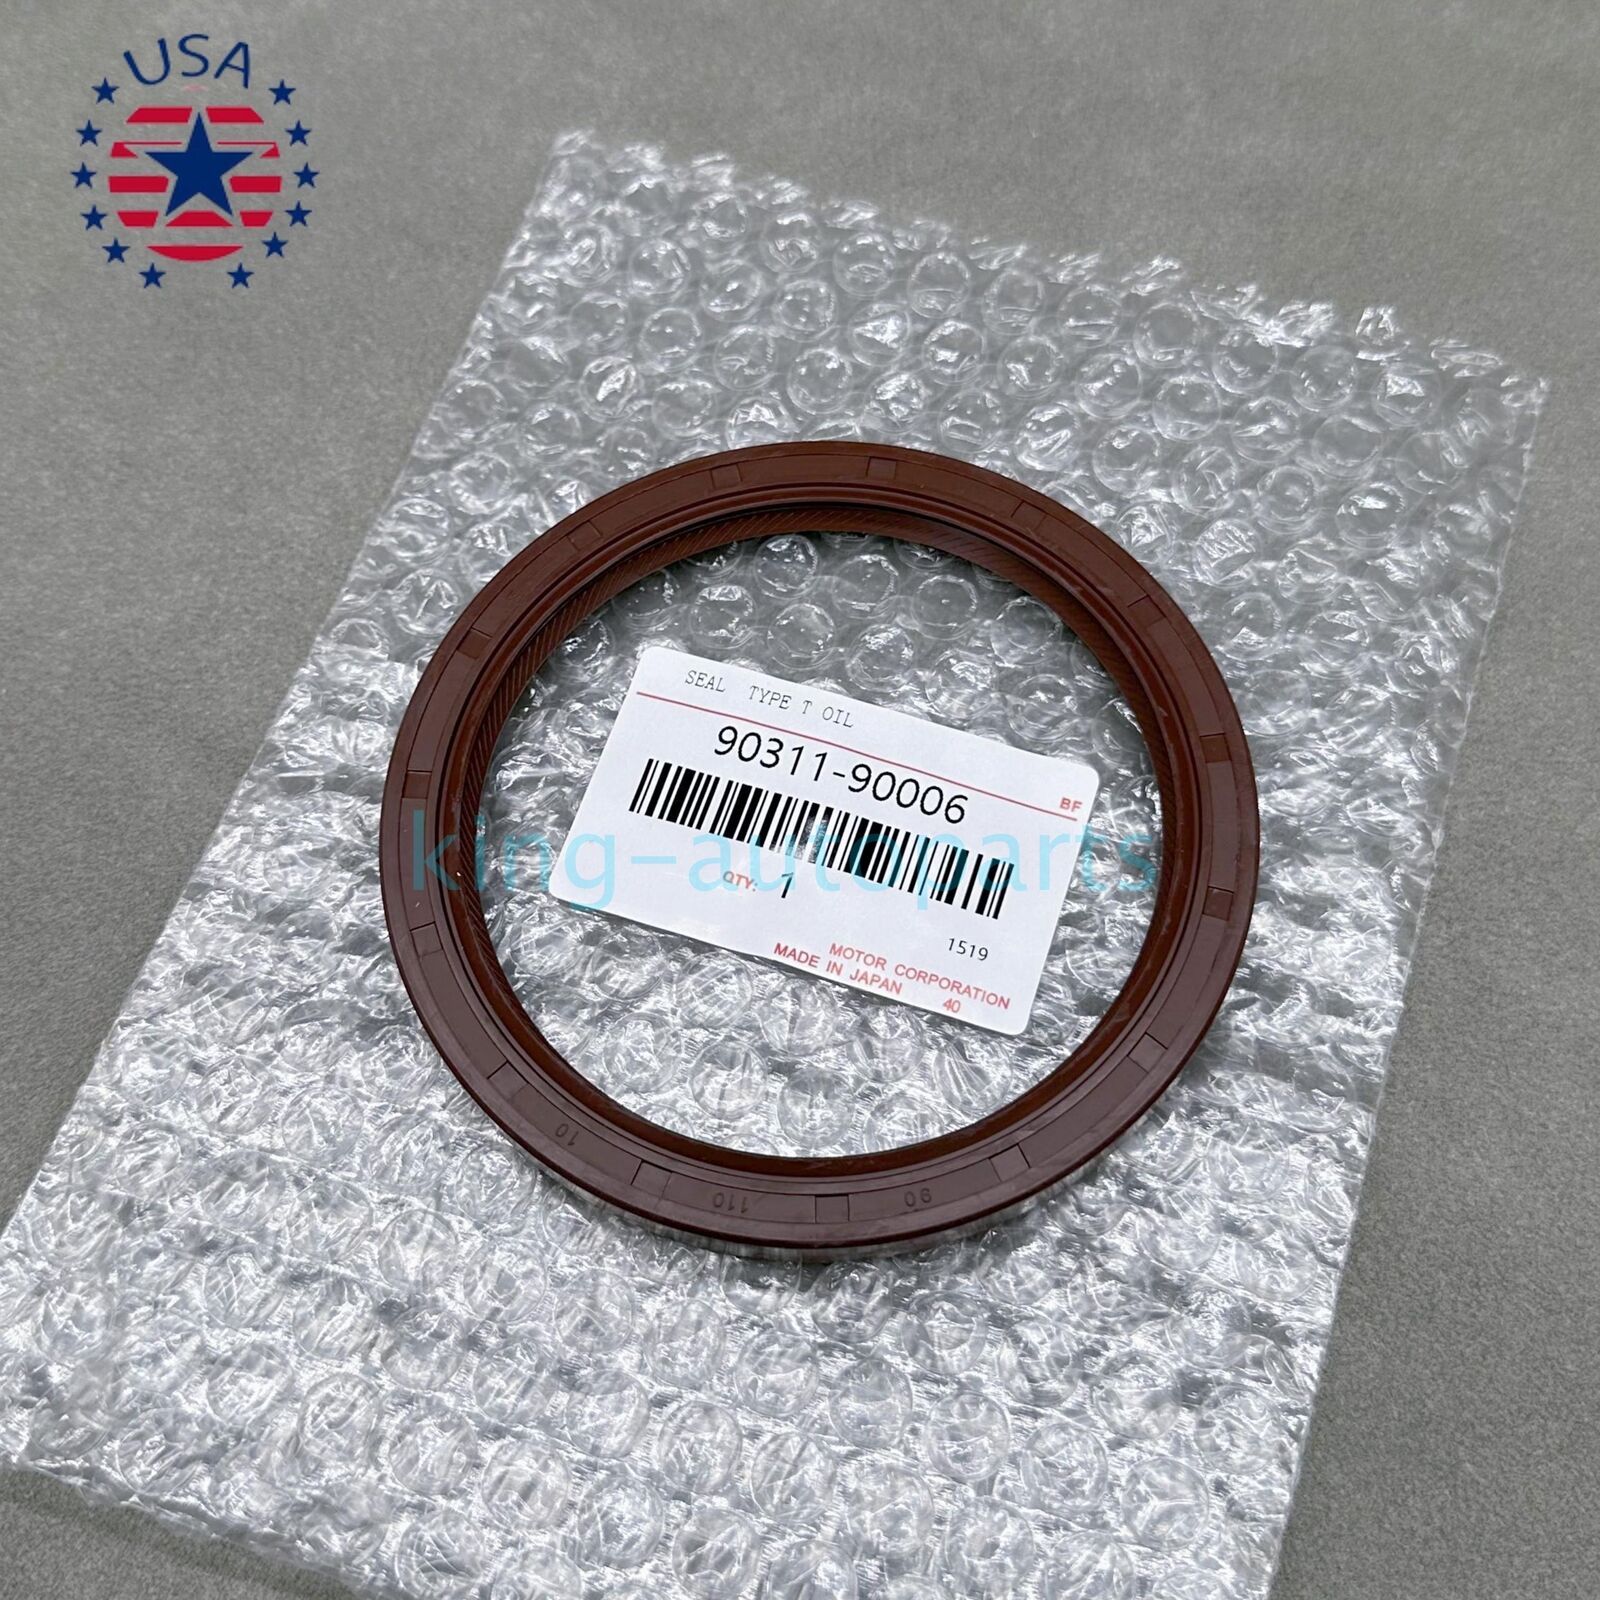 OEM For Toyota Supra IS300 GS300 SC300 2JZ New Rear Main Oil Seal 90311-90006 US